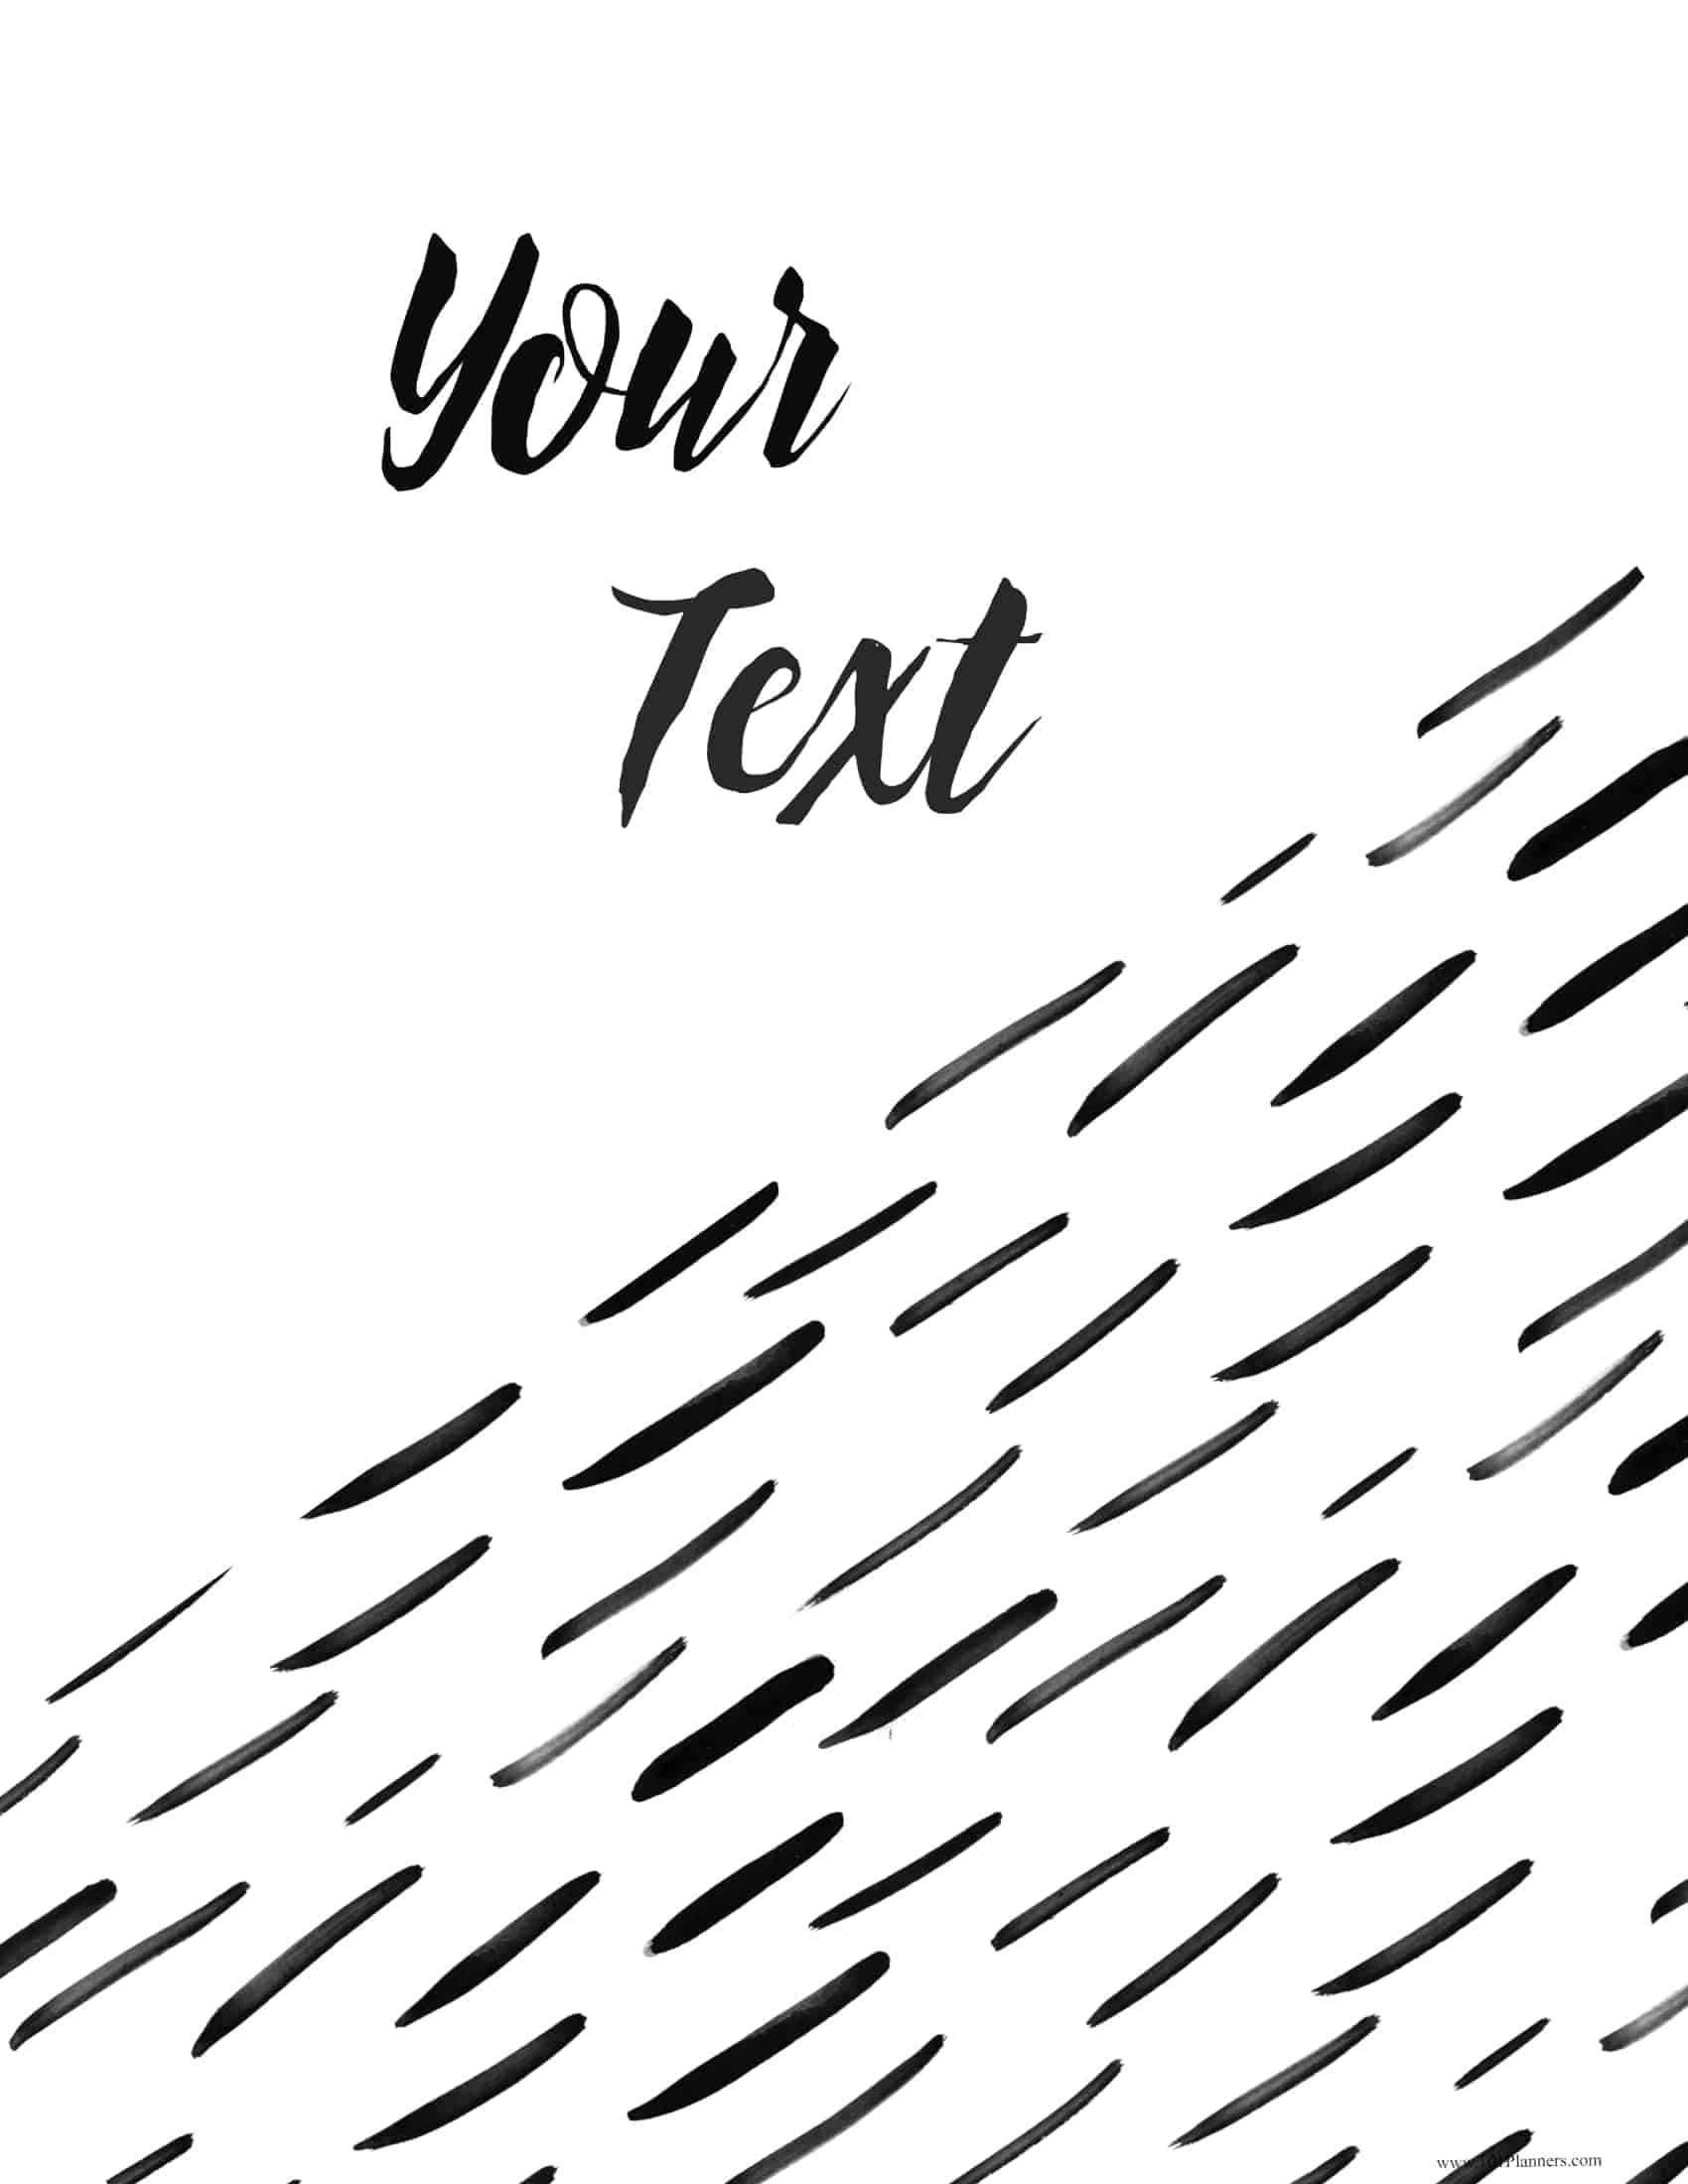 FREE Binder Covers Black and White with Custom Text